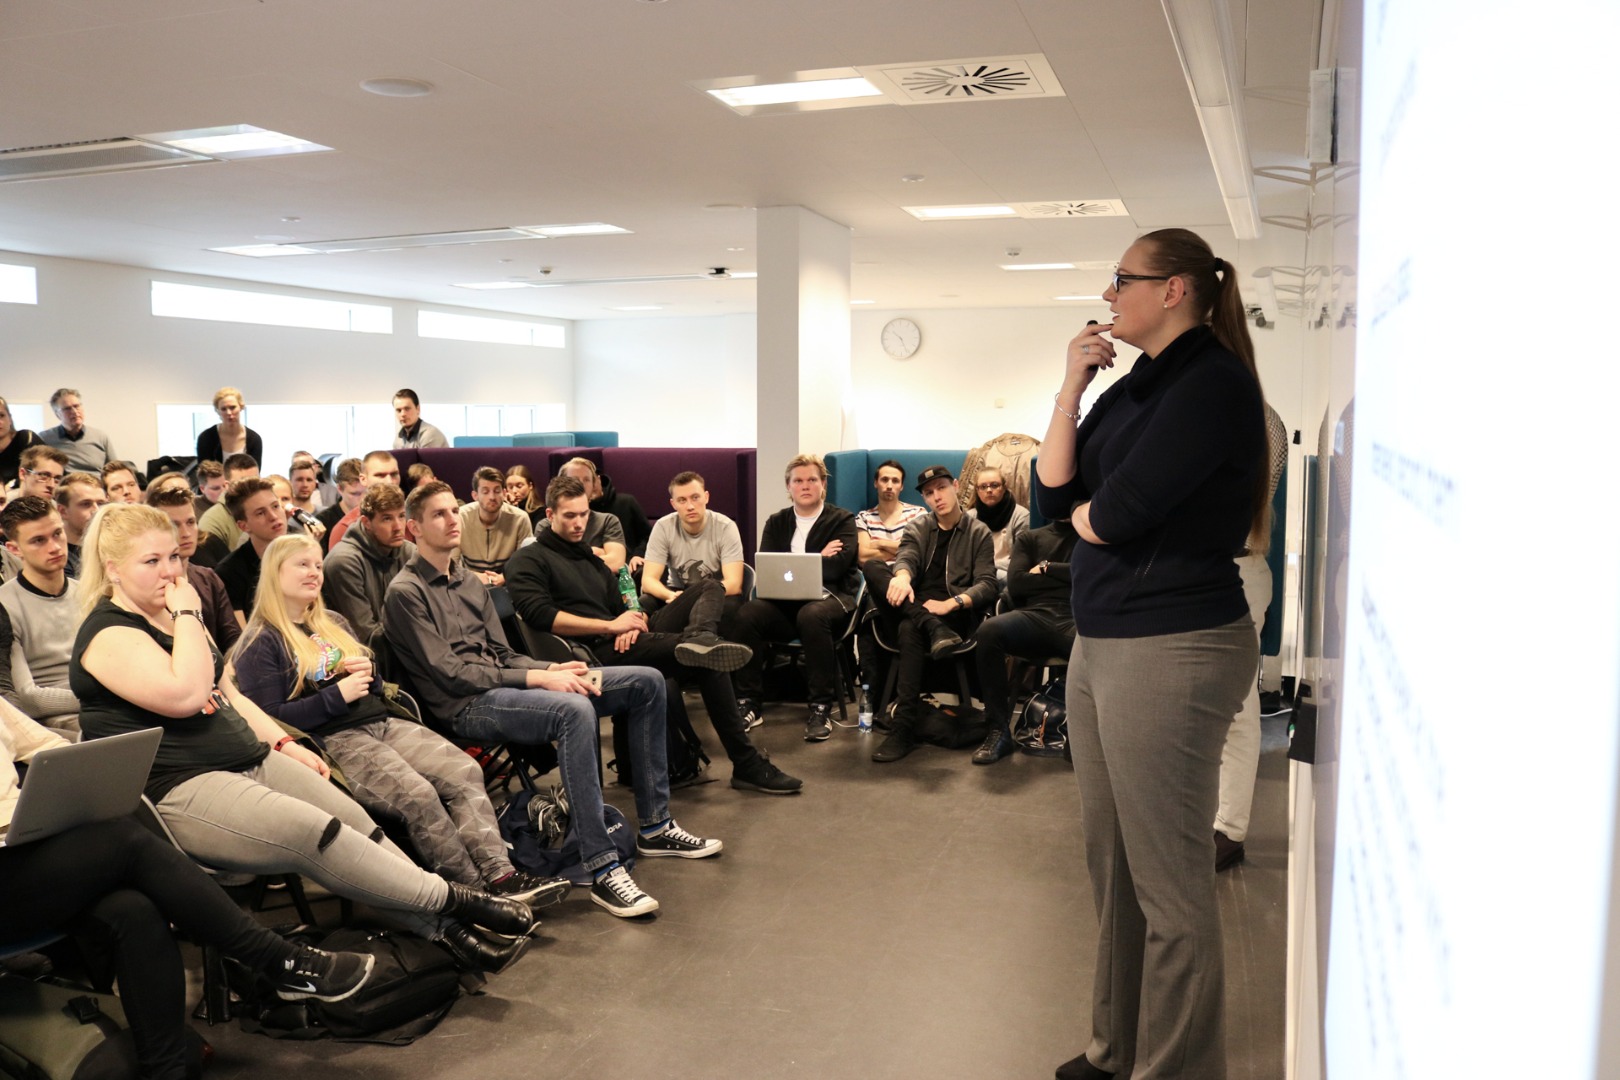 VP of Operations at AthGene, Anita Berntsen, to the students.